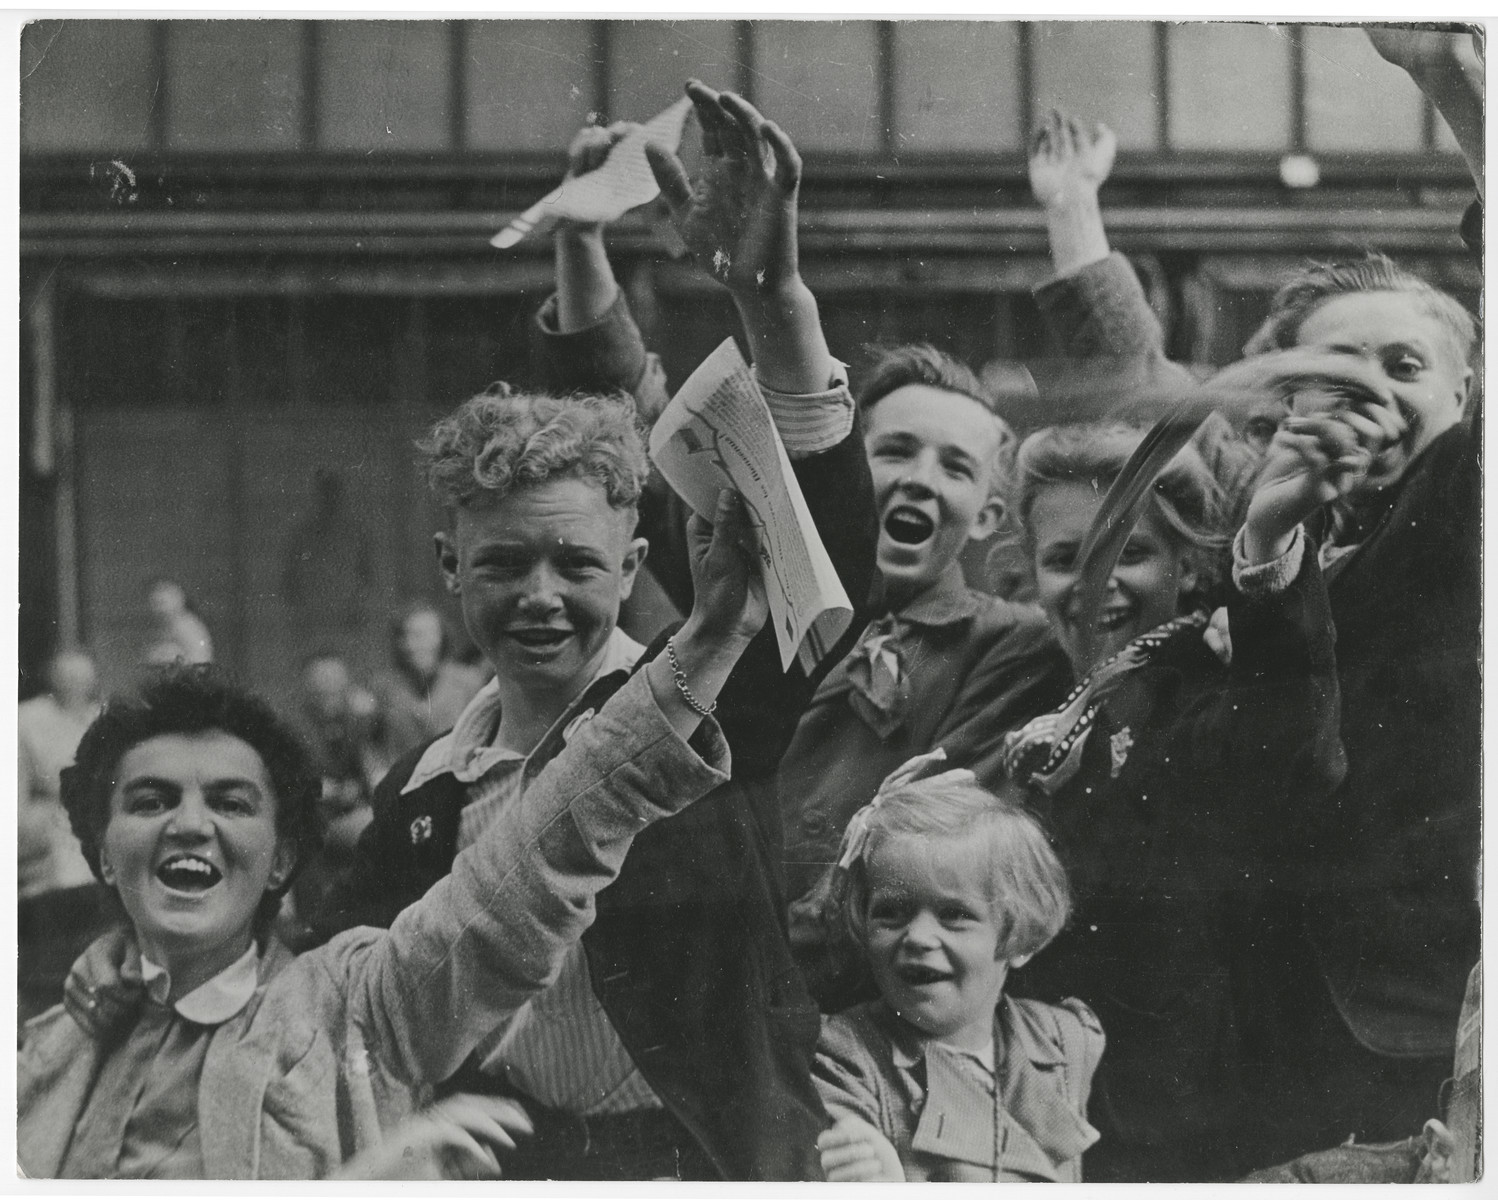 Dutch citizens celebrate the liberation of Utrecht.

Original caption reads:  "Crowds celebrating victory in the streets of Utrecht, Holland, are fired on by Nazi fanatics hiding in a building overlooking the parade.  After a sharp skirmish, the Germans were captured by Dutch patriots and the celebration was resumed.  Here, as the Nazis open fire on the victory crowds, Dutch patriots go into action".